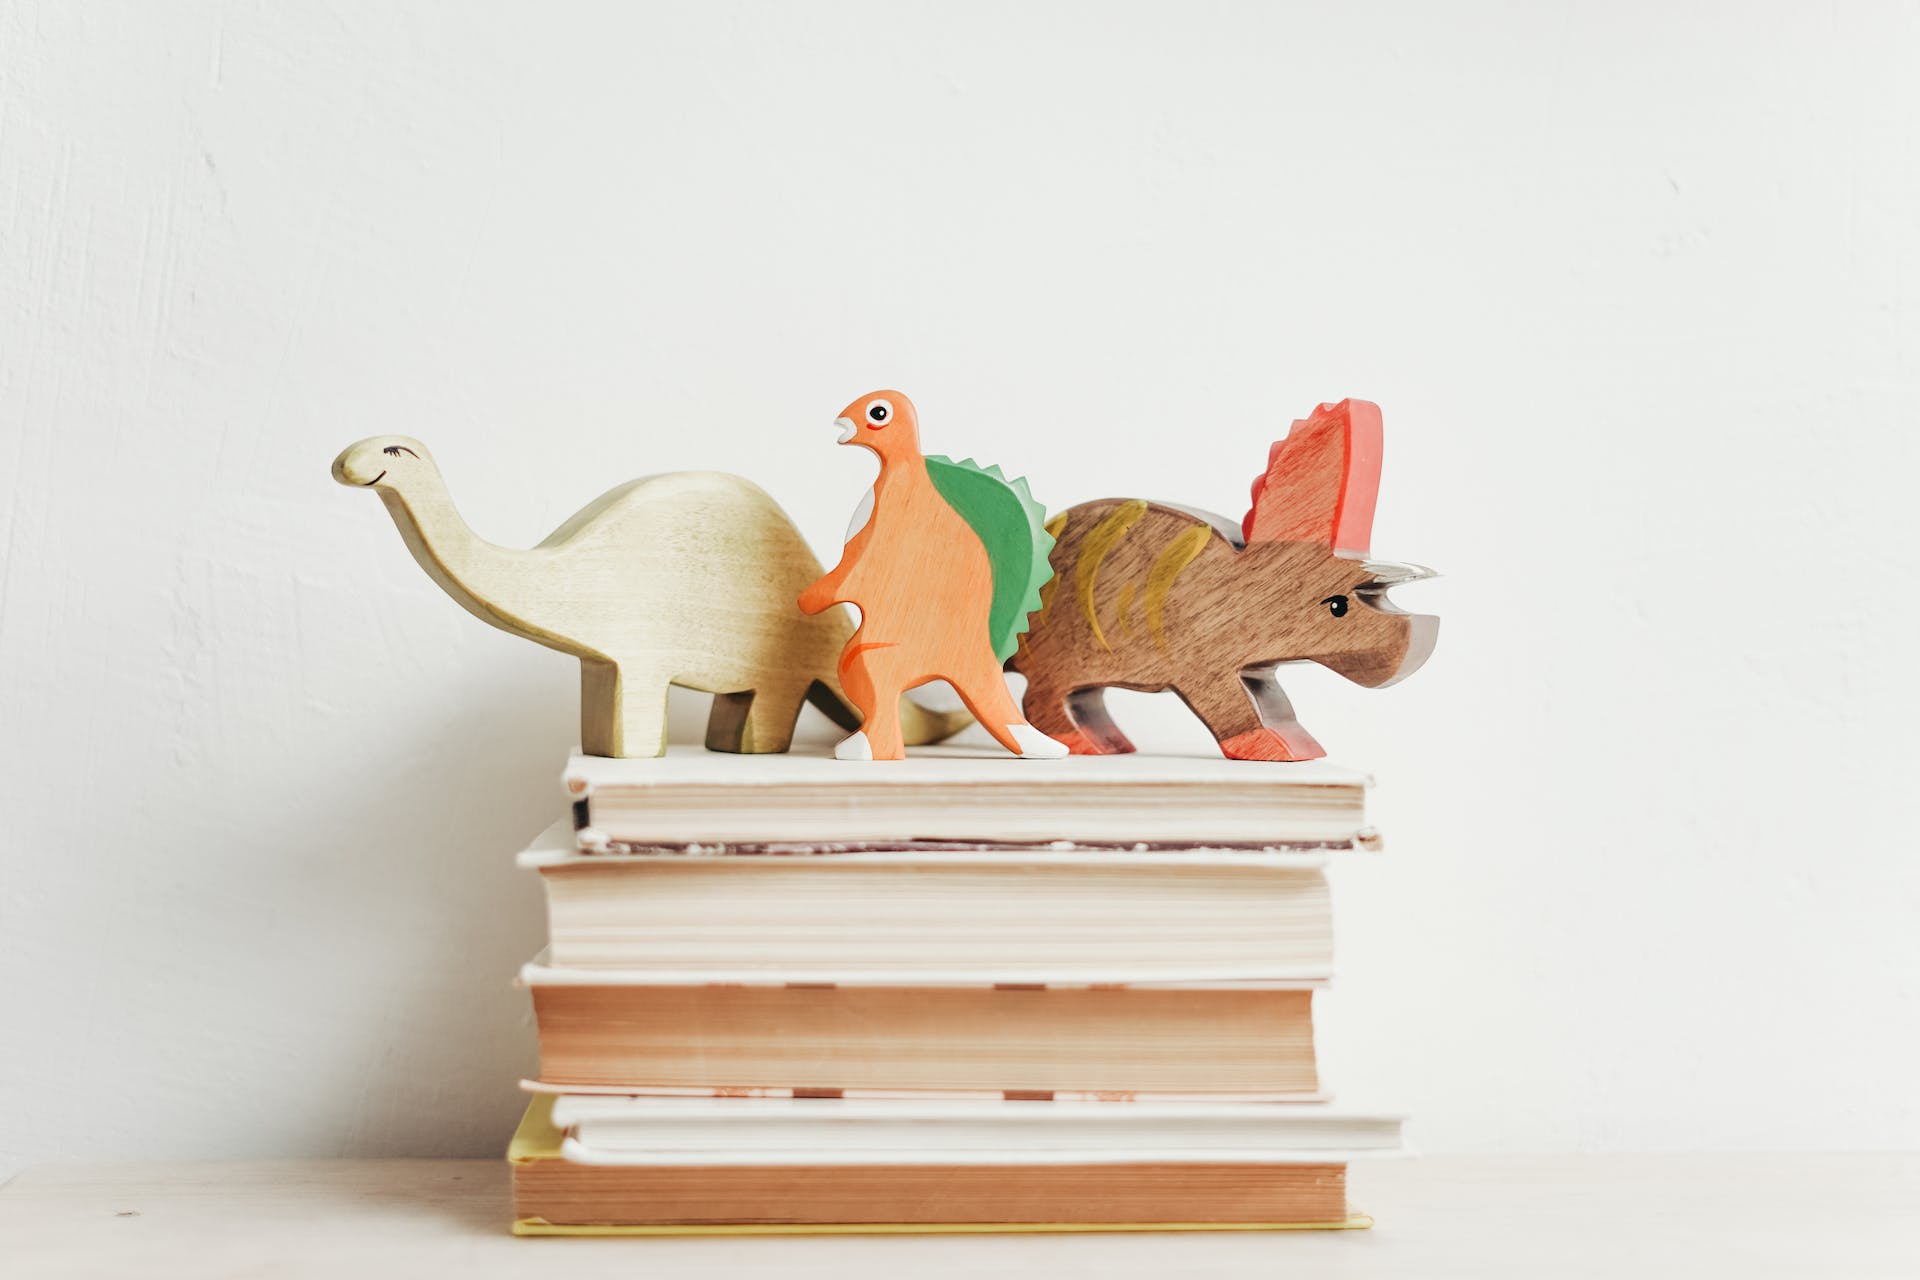 Three wooden dinosaurs stand on top of a stack of books